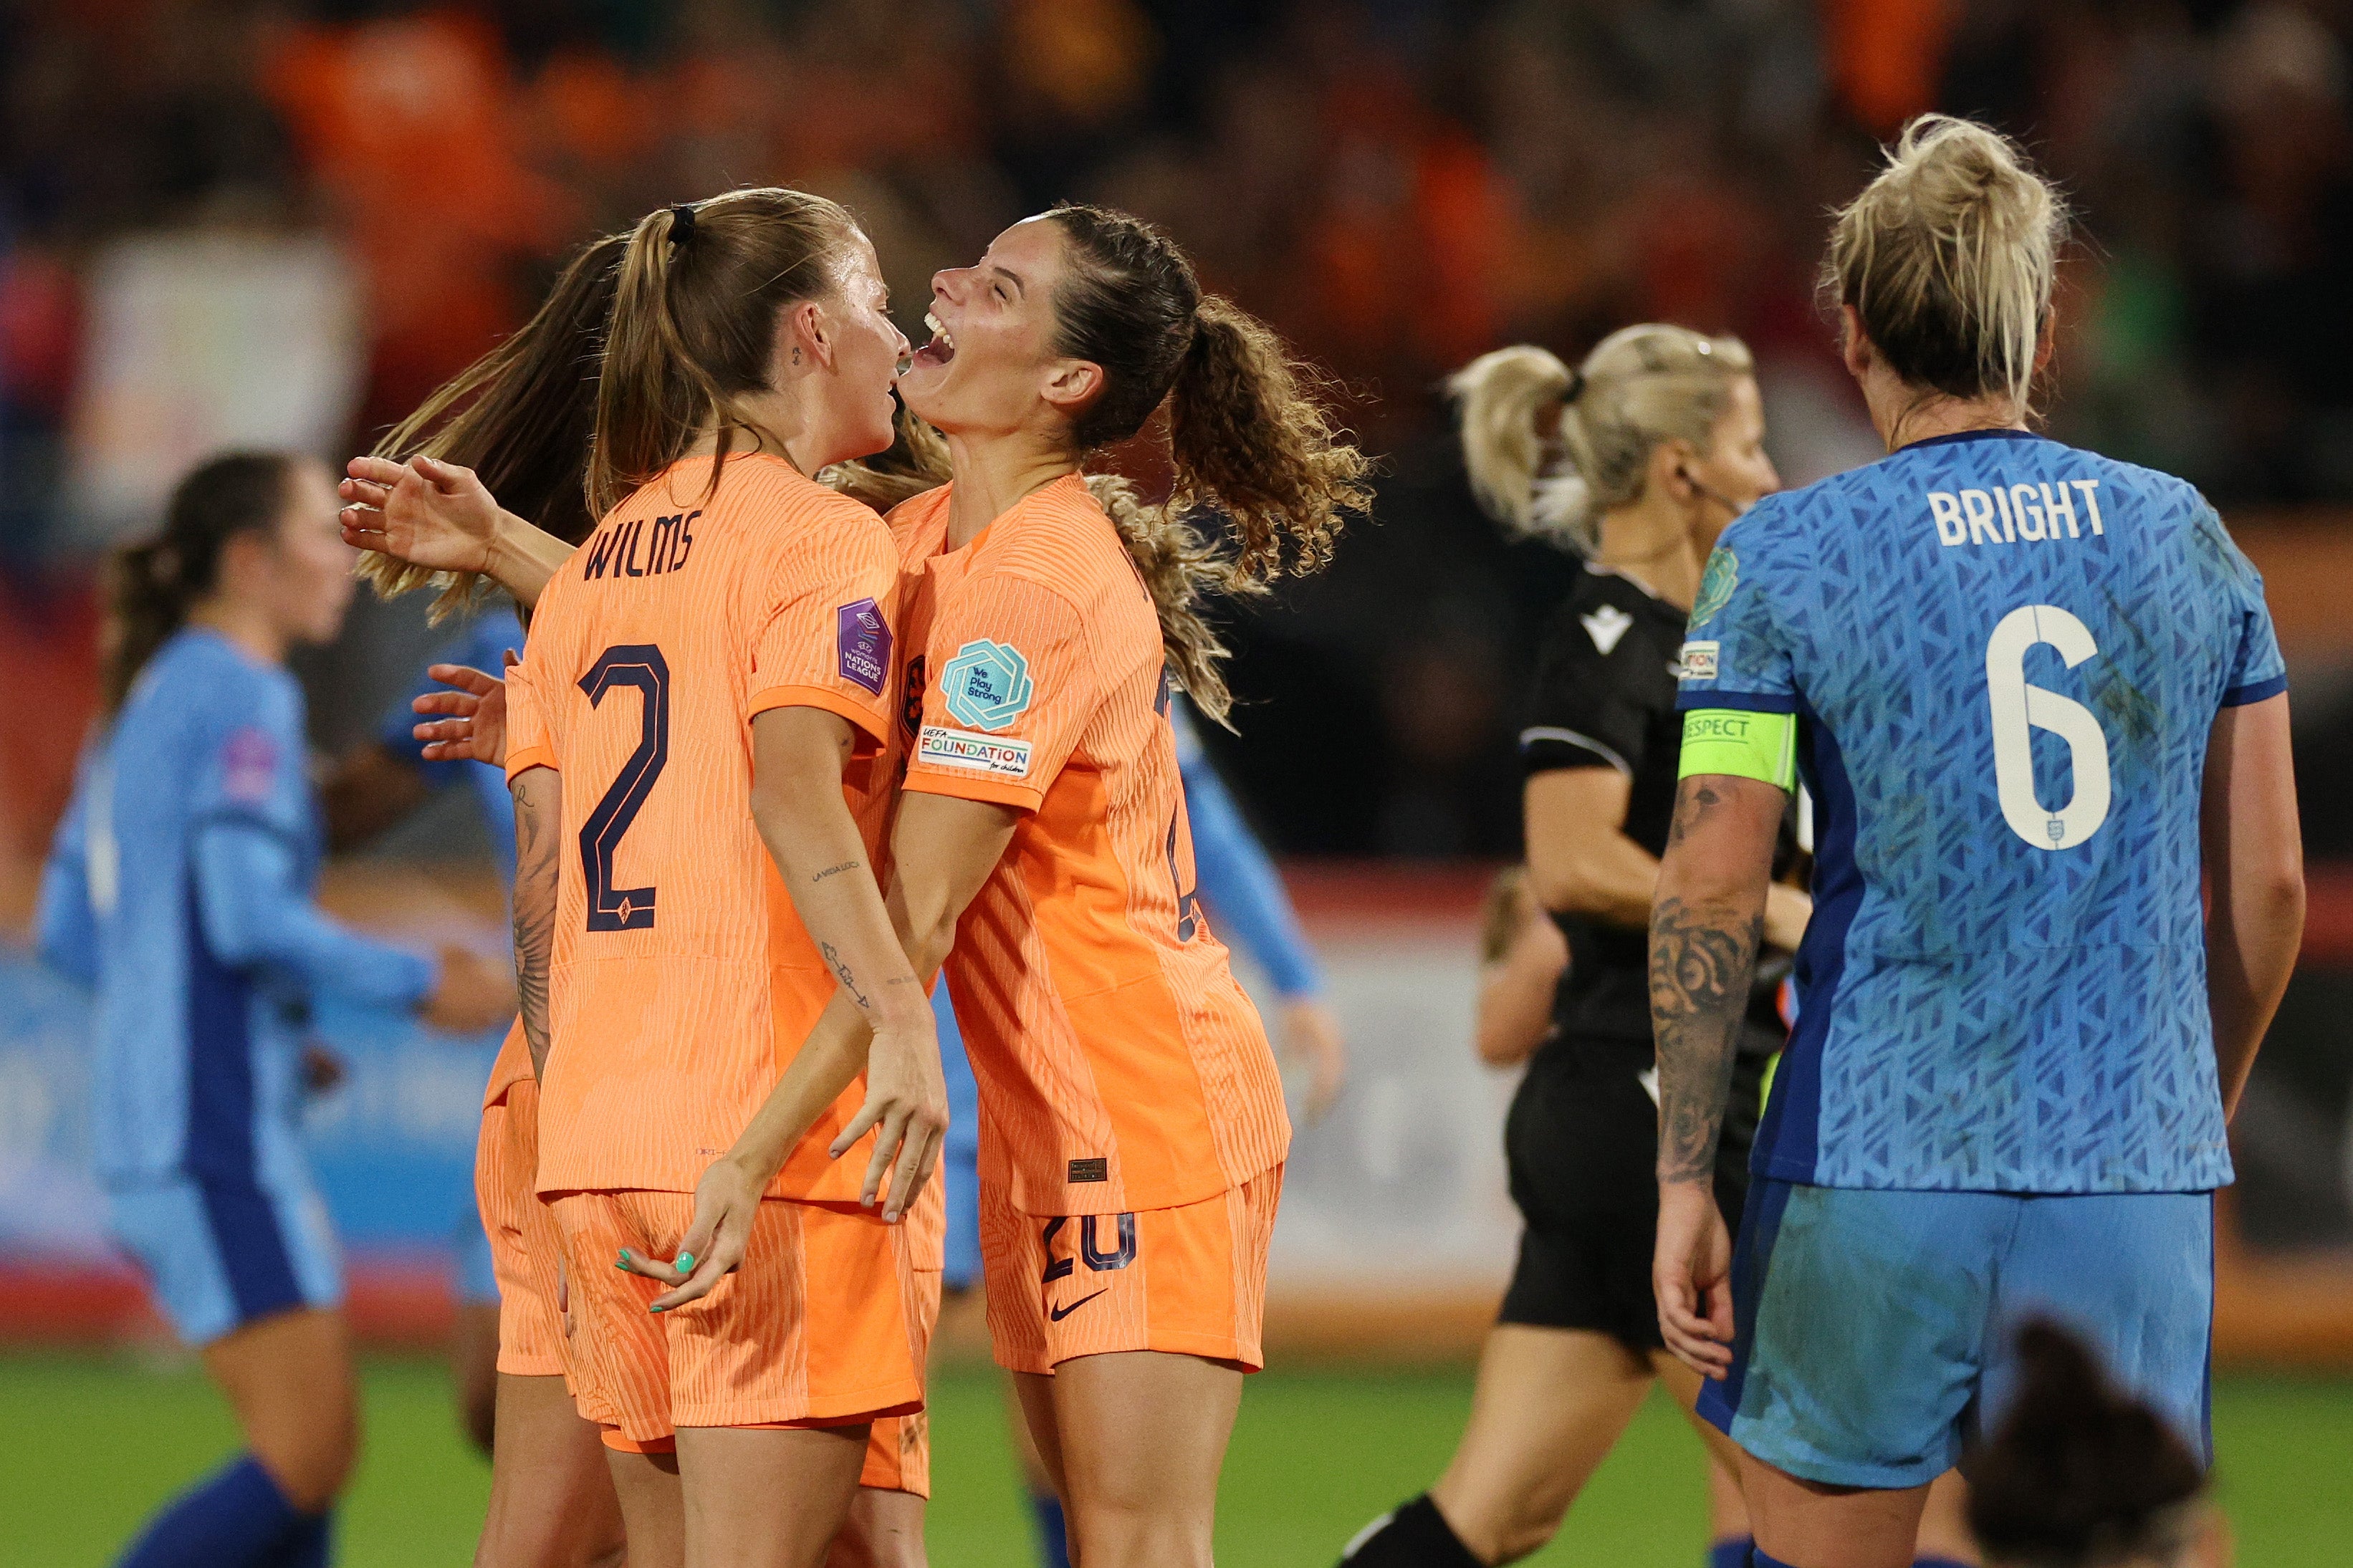 The Dutch team were able to pull away from the Lionesses, retaking the lead late on